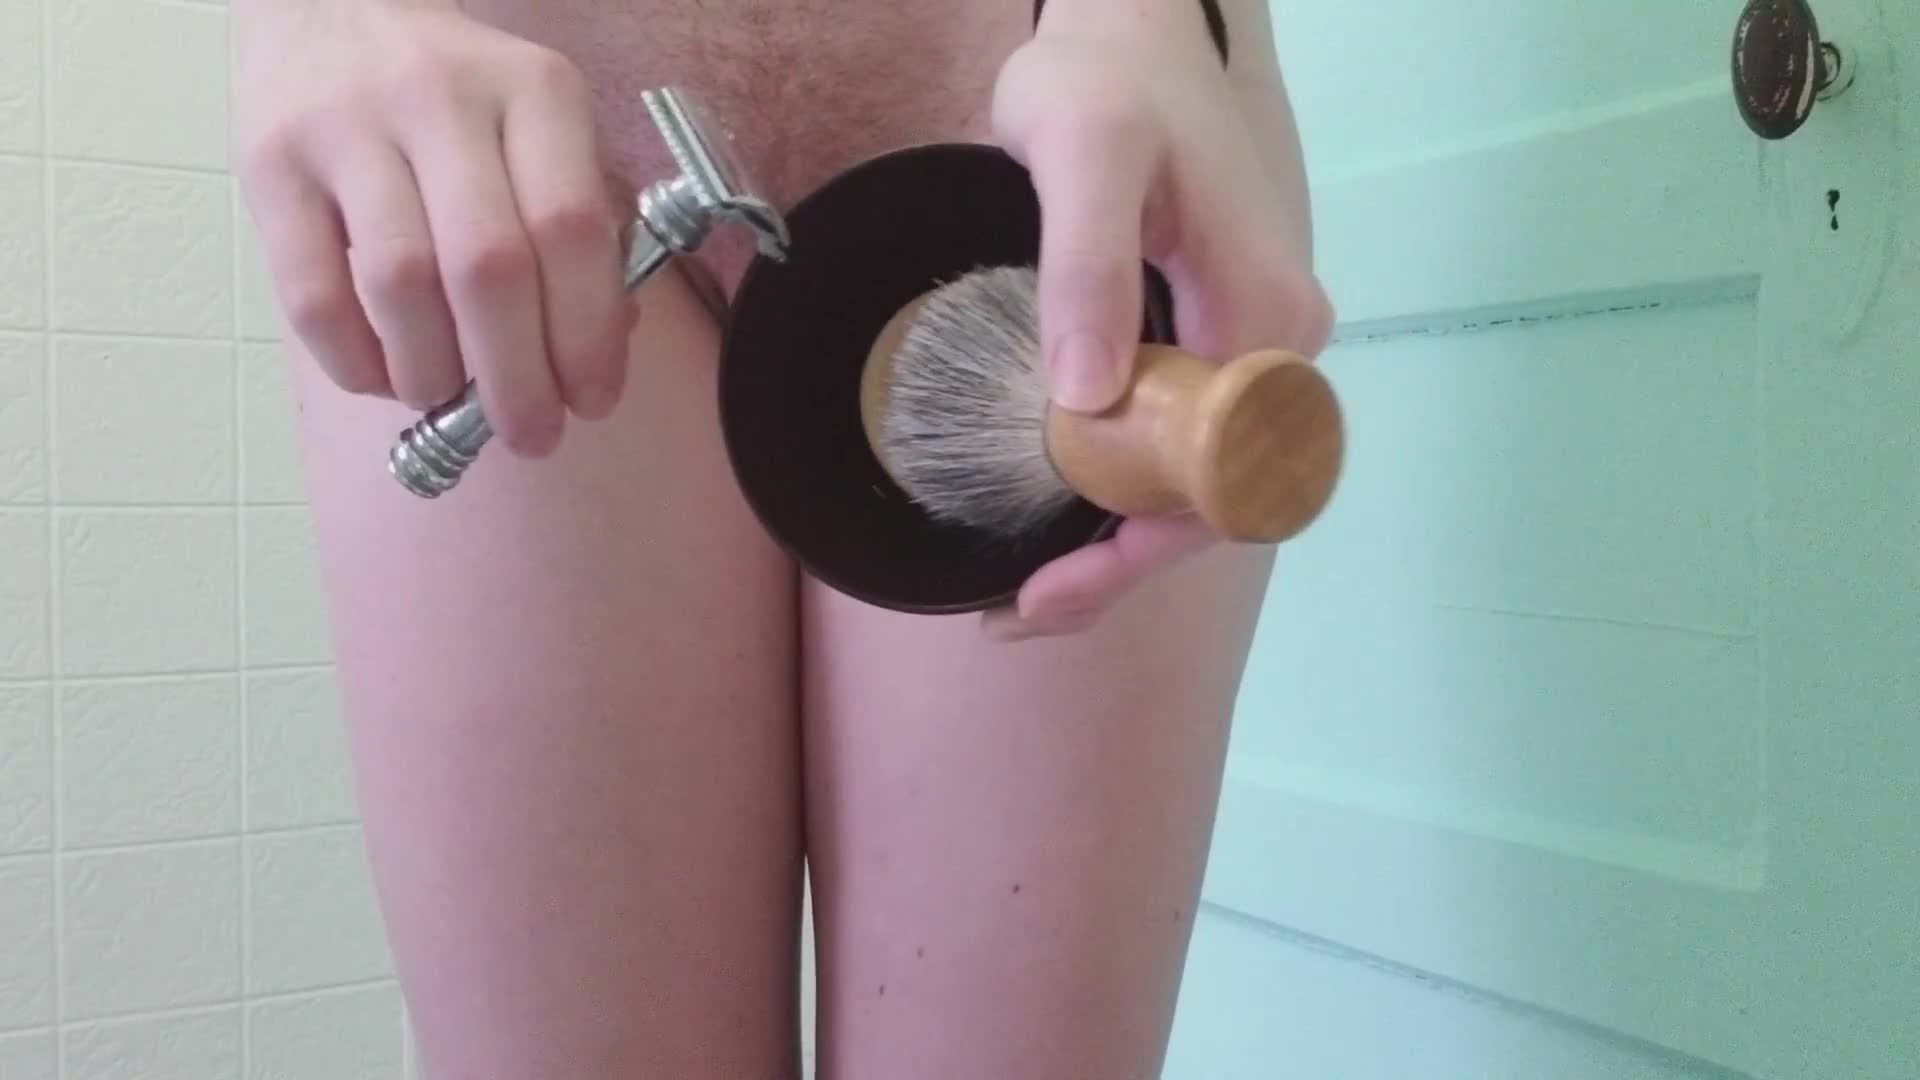 Furry to Smooth: Watch Me Shave